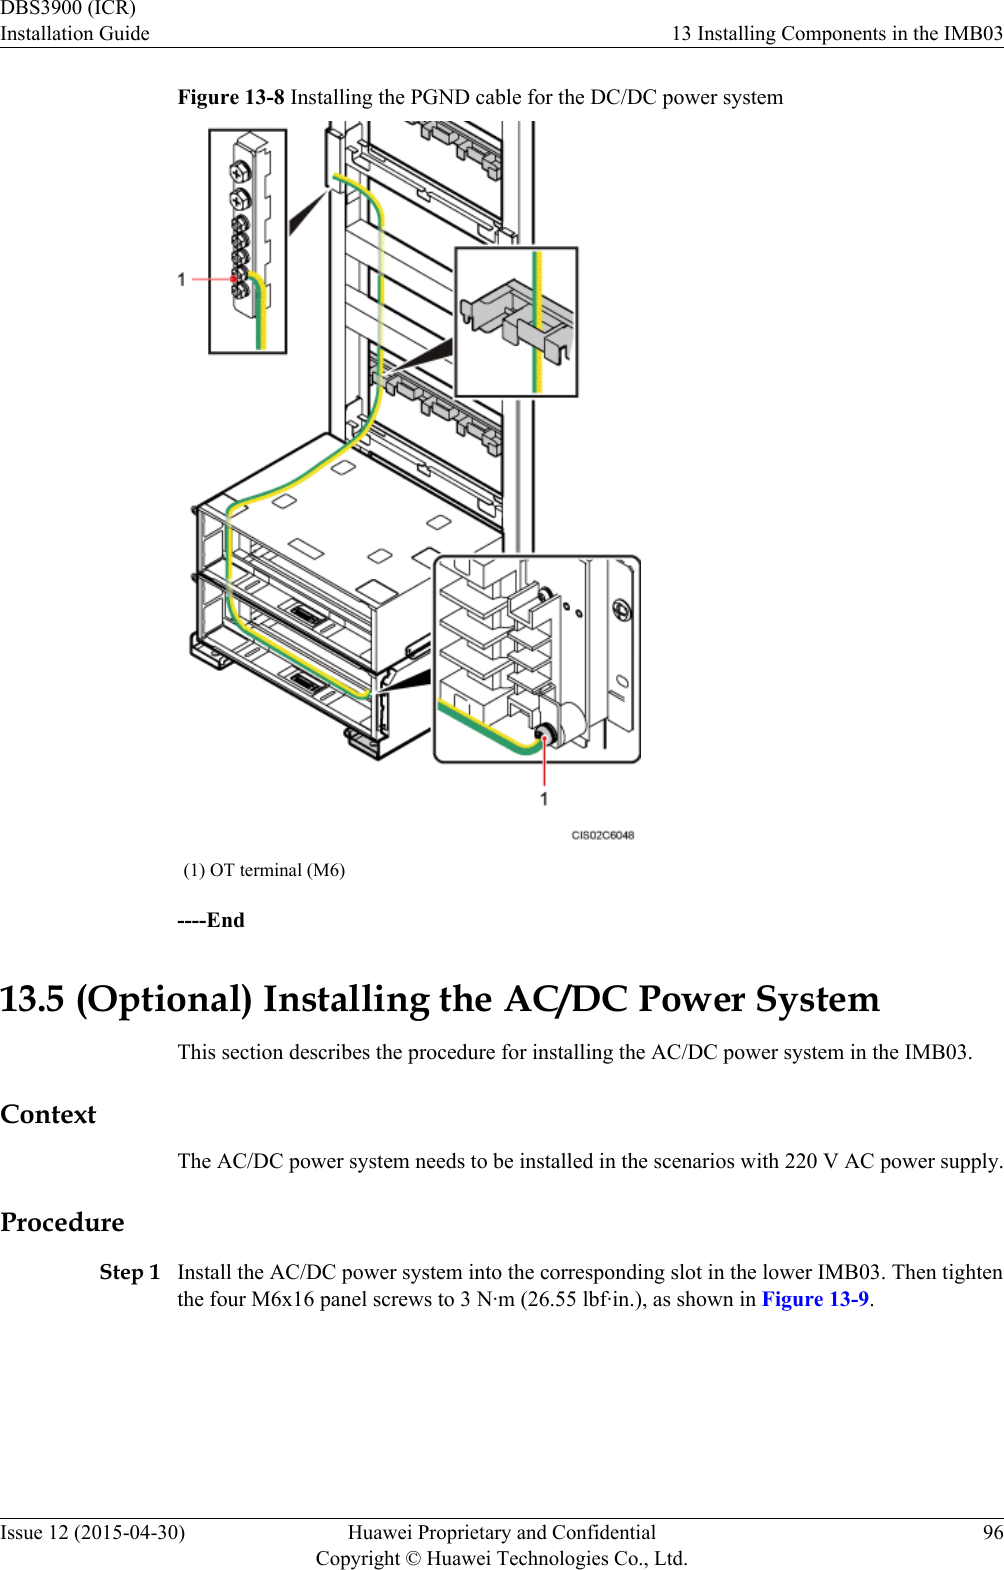 Figure 13-8 Installing the PGND cable for the DC/DC power system(1) OT terminal (M6)----End13.5 (Optional) Installing the AC/DC Power SystemThis section describes the procedure for installing the AC/DC power system in the IMB03.ContextThe AC/DC power system needs to be installed in the scenarios with 220 V AC power supply.ProcedureStep 1 Install the AC/DC power system into the corresponding slot in the lower IMB03. Then tightenthe four M6x16 panel screws to 3 N·m (26.55 lbf·in.), as shown in Figure 13-9.DBS3900 (ICR)Installation Guide 13 Installing Components in the IMB03Issue 12 (2015-04-30) Huawei Proprietary and ConfidentialCopyright © Huawei Technologies Co., Ltd.96